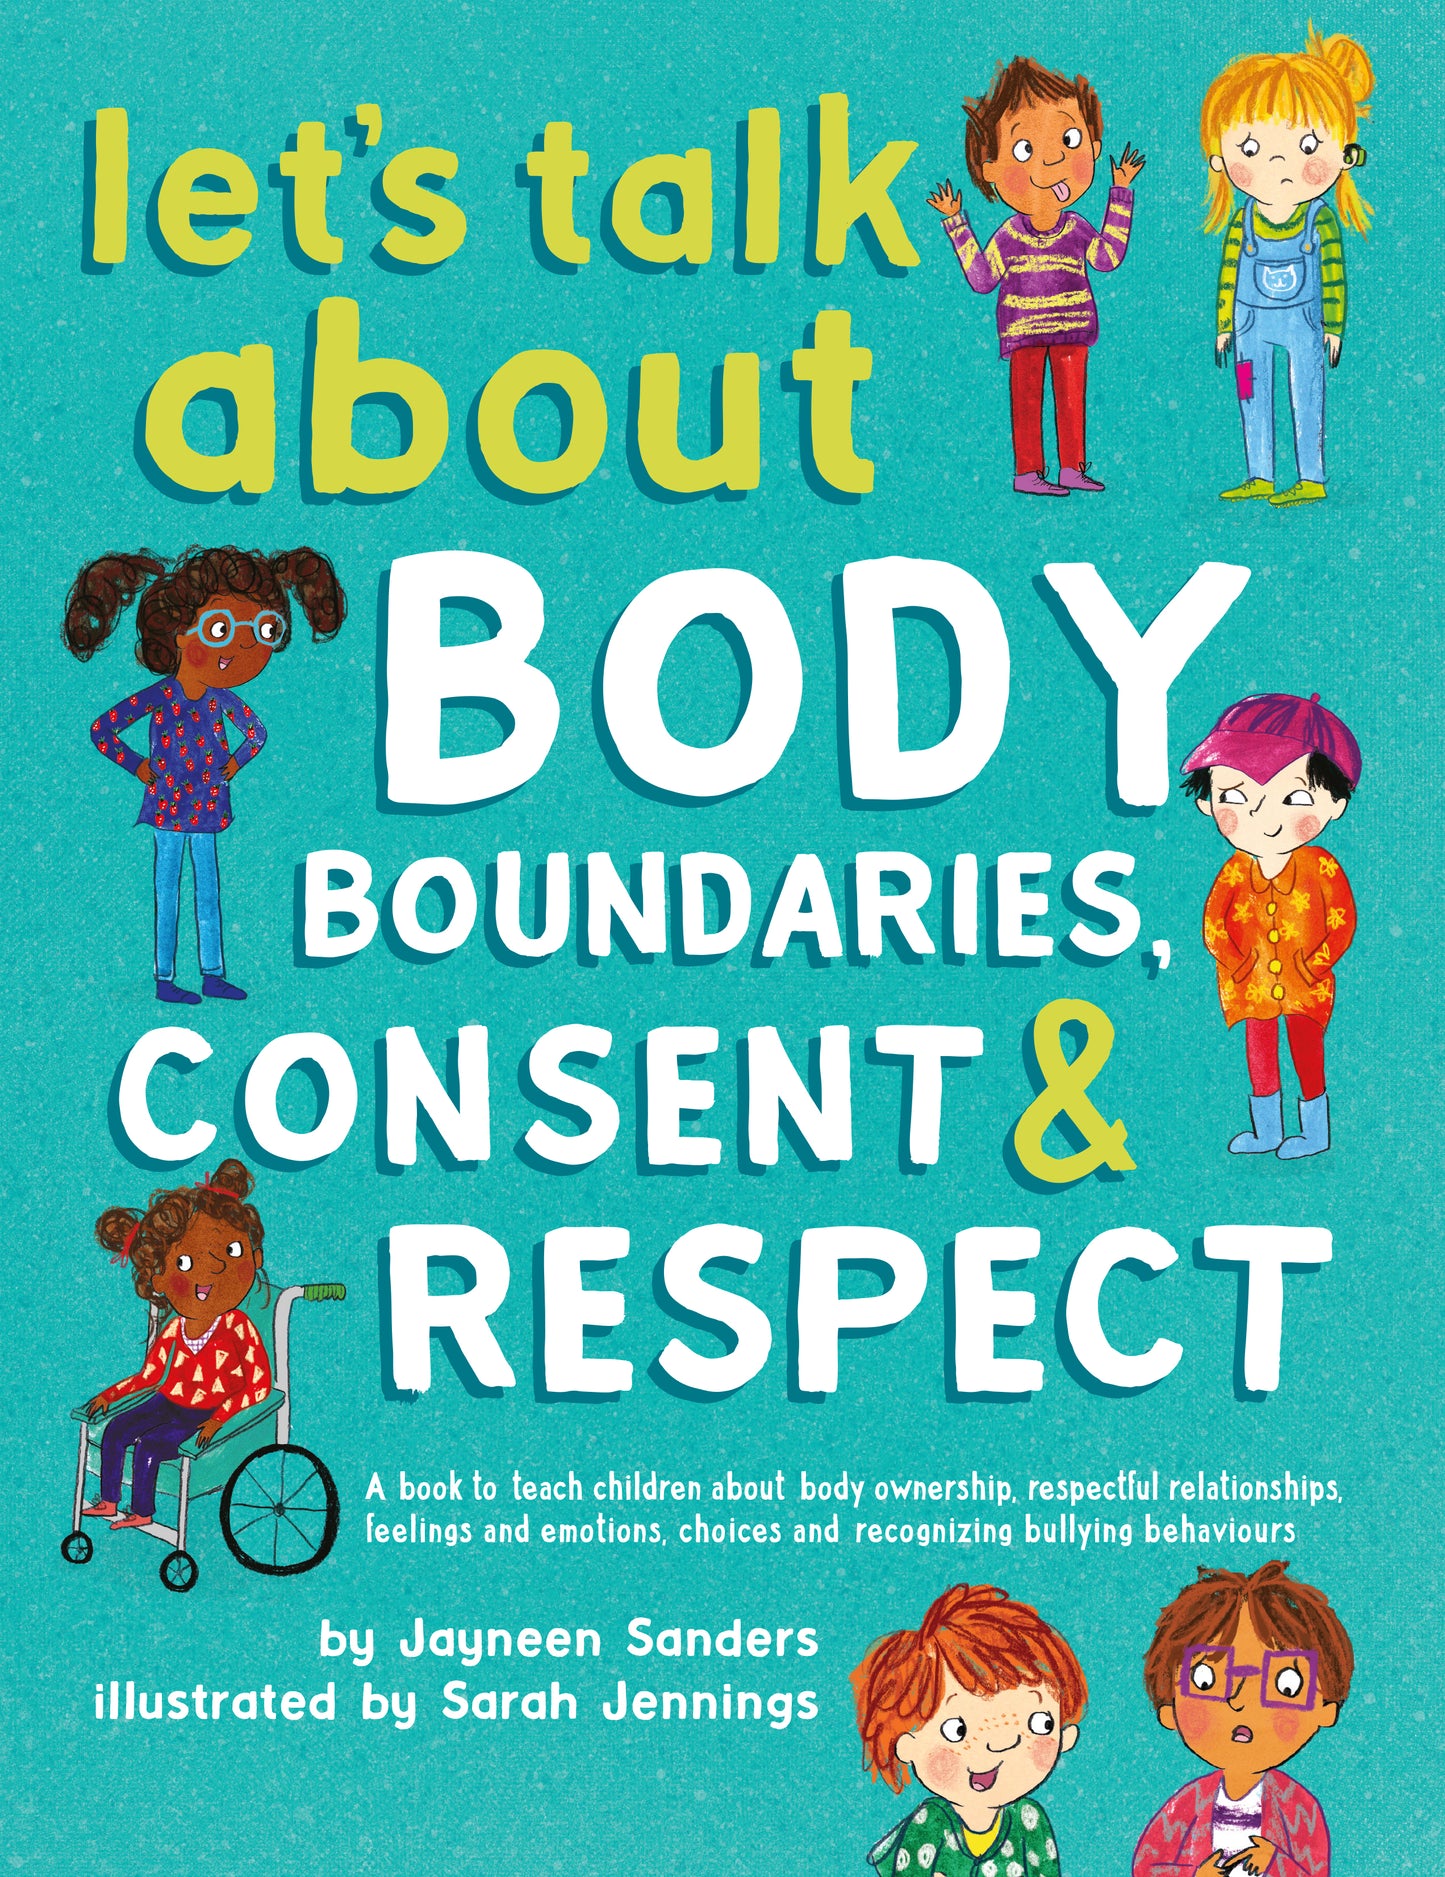 The cover of the book ‘Let's Talk About Body Boundaries, Consent & Respect’ by Jayneen Sanders.